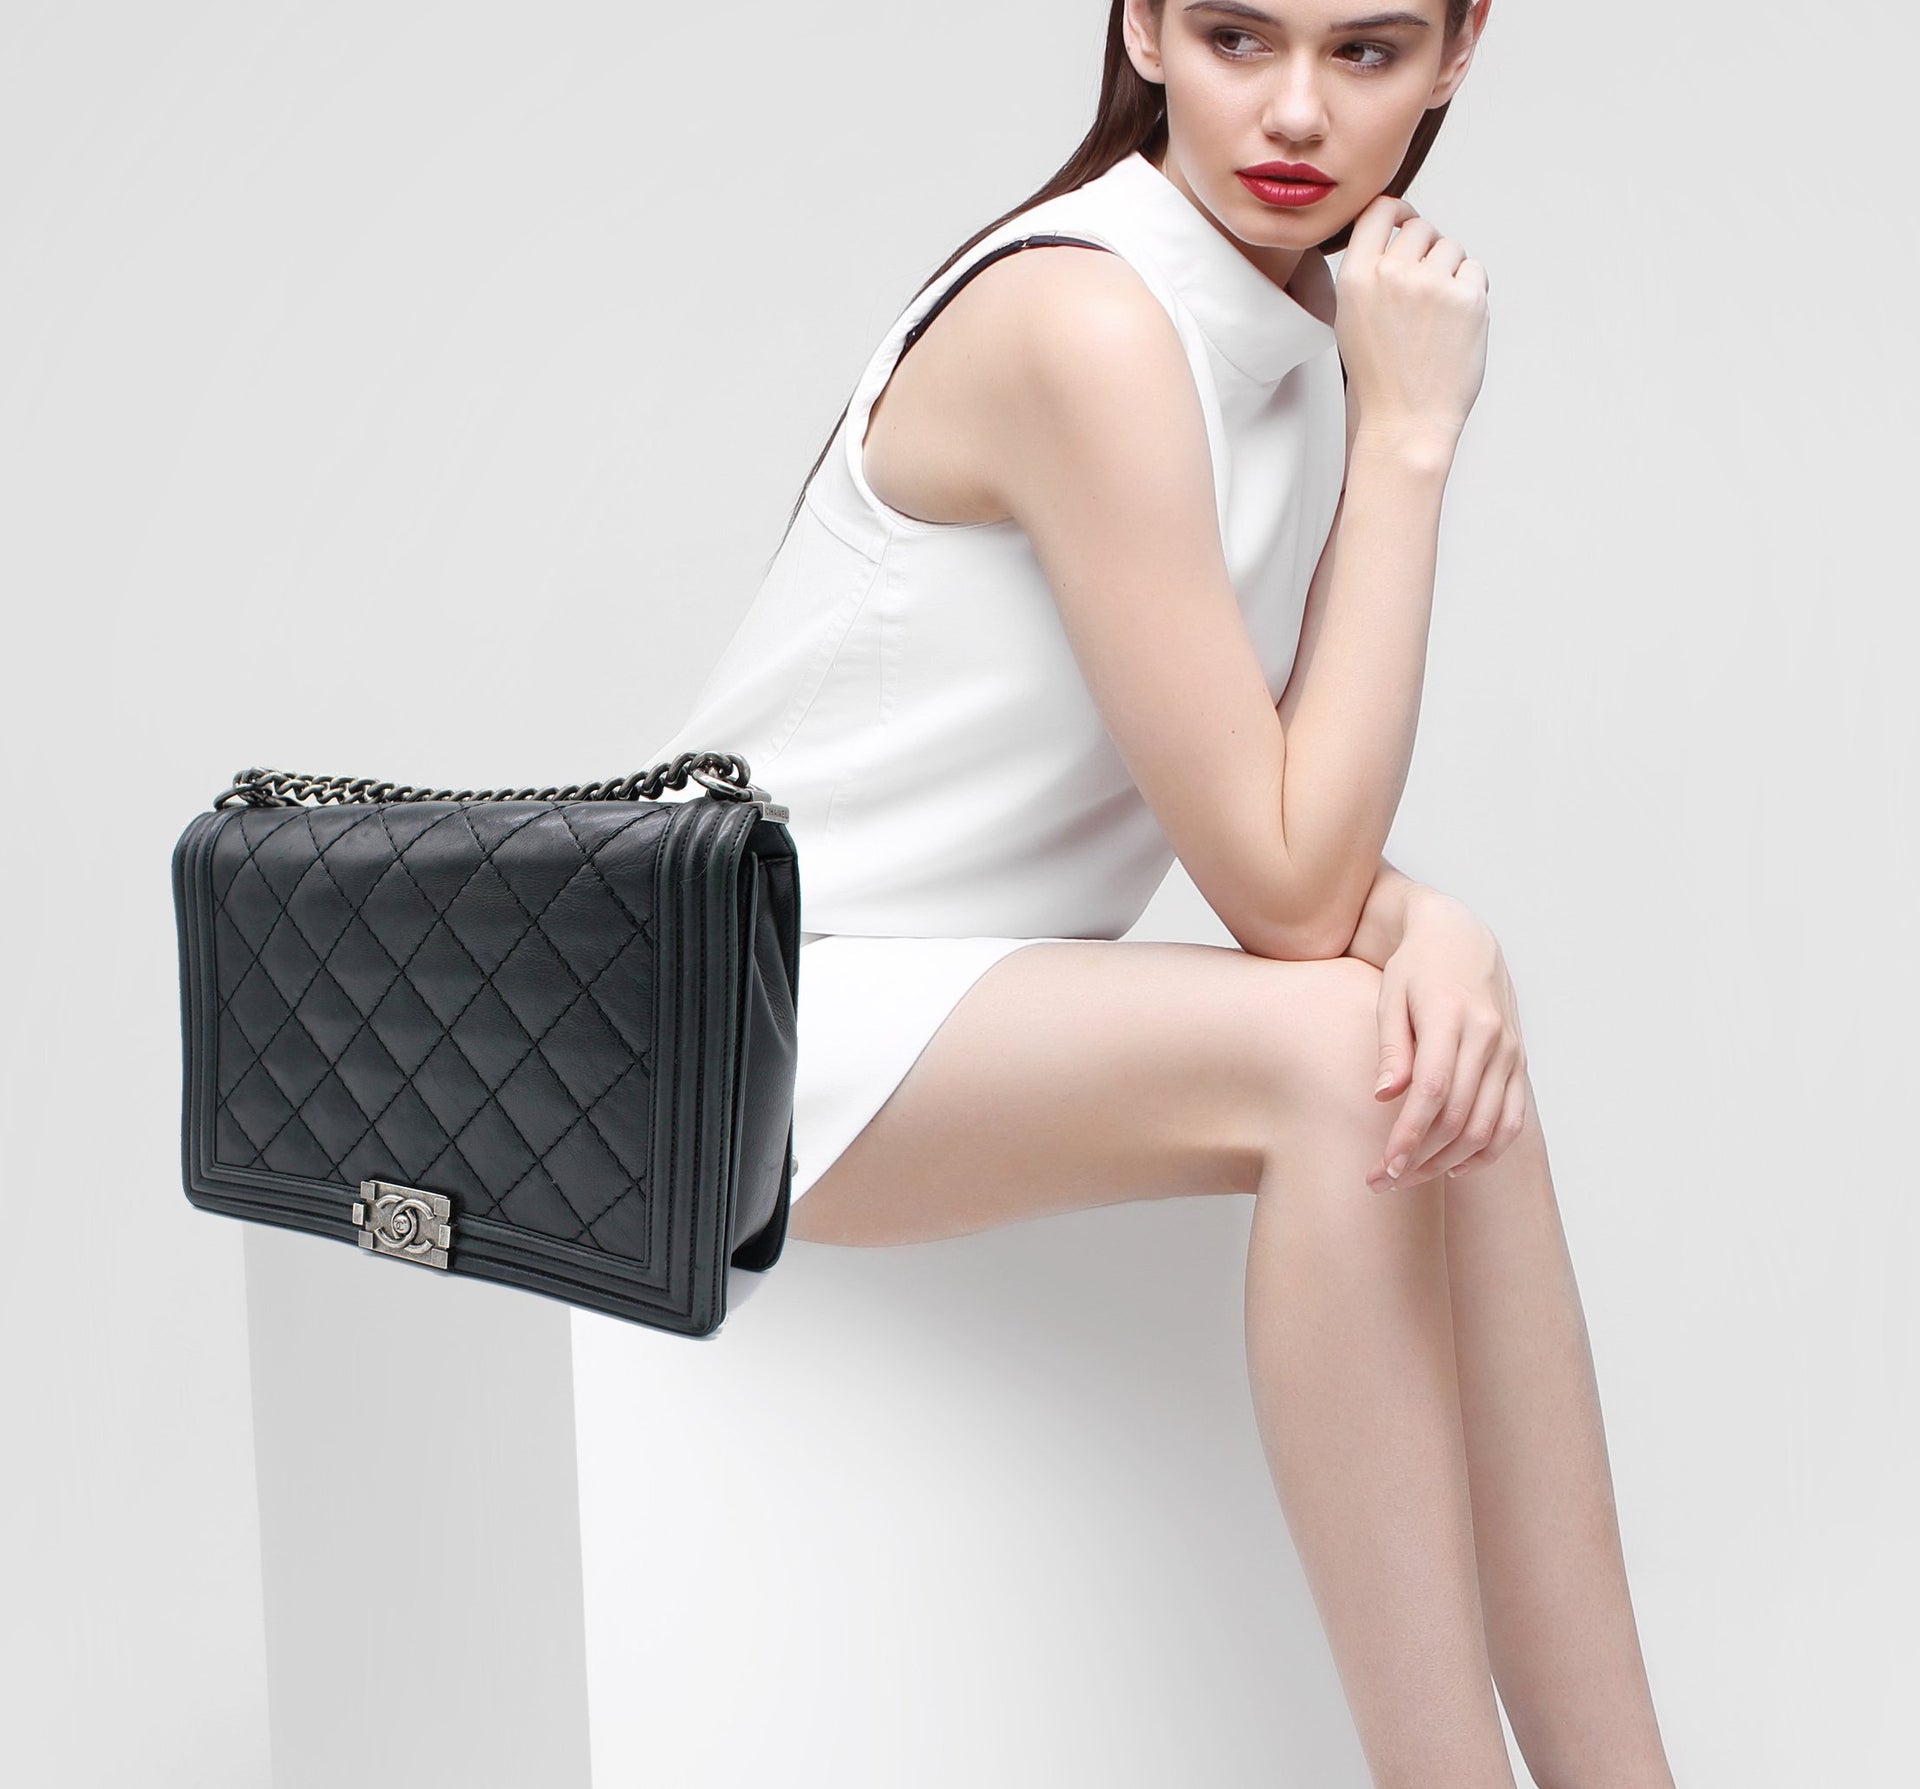 Take A Look At The Boy Chanel Clutch With Chain & Belt Bag